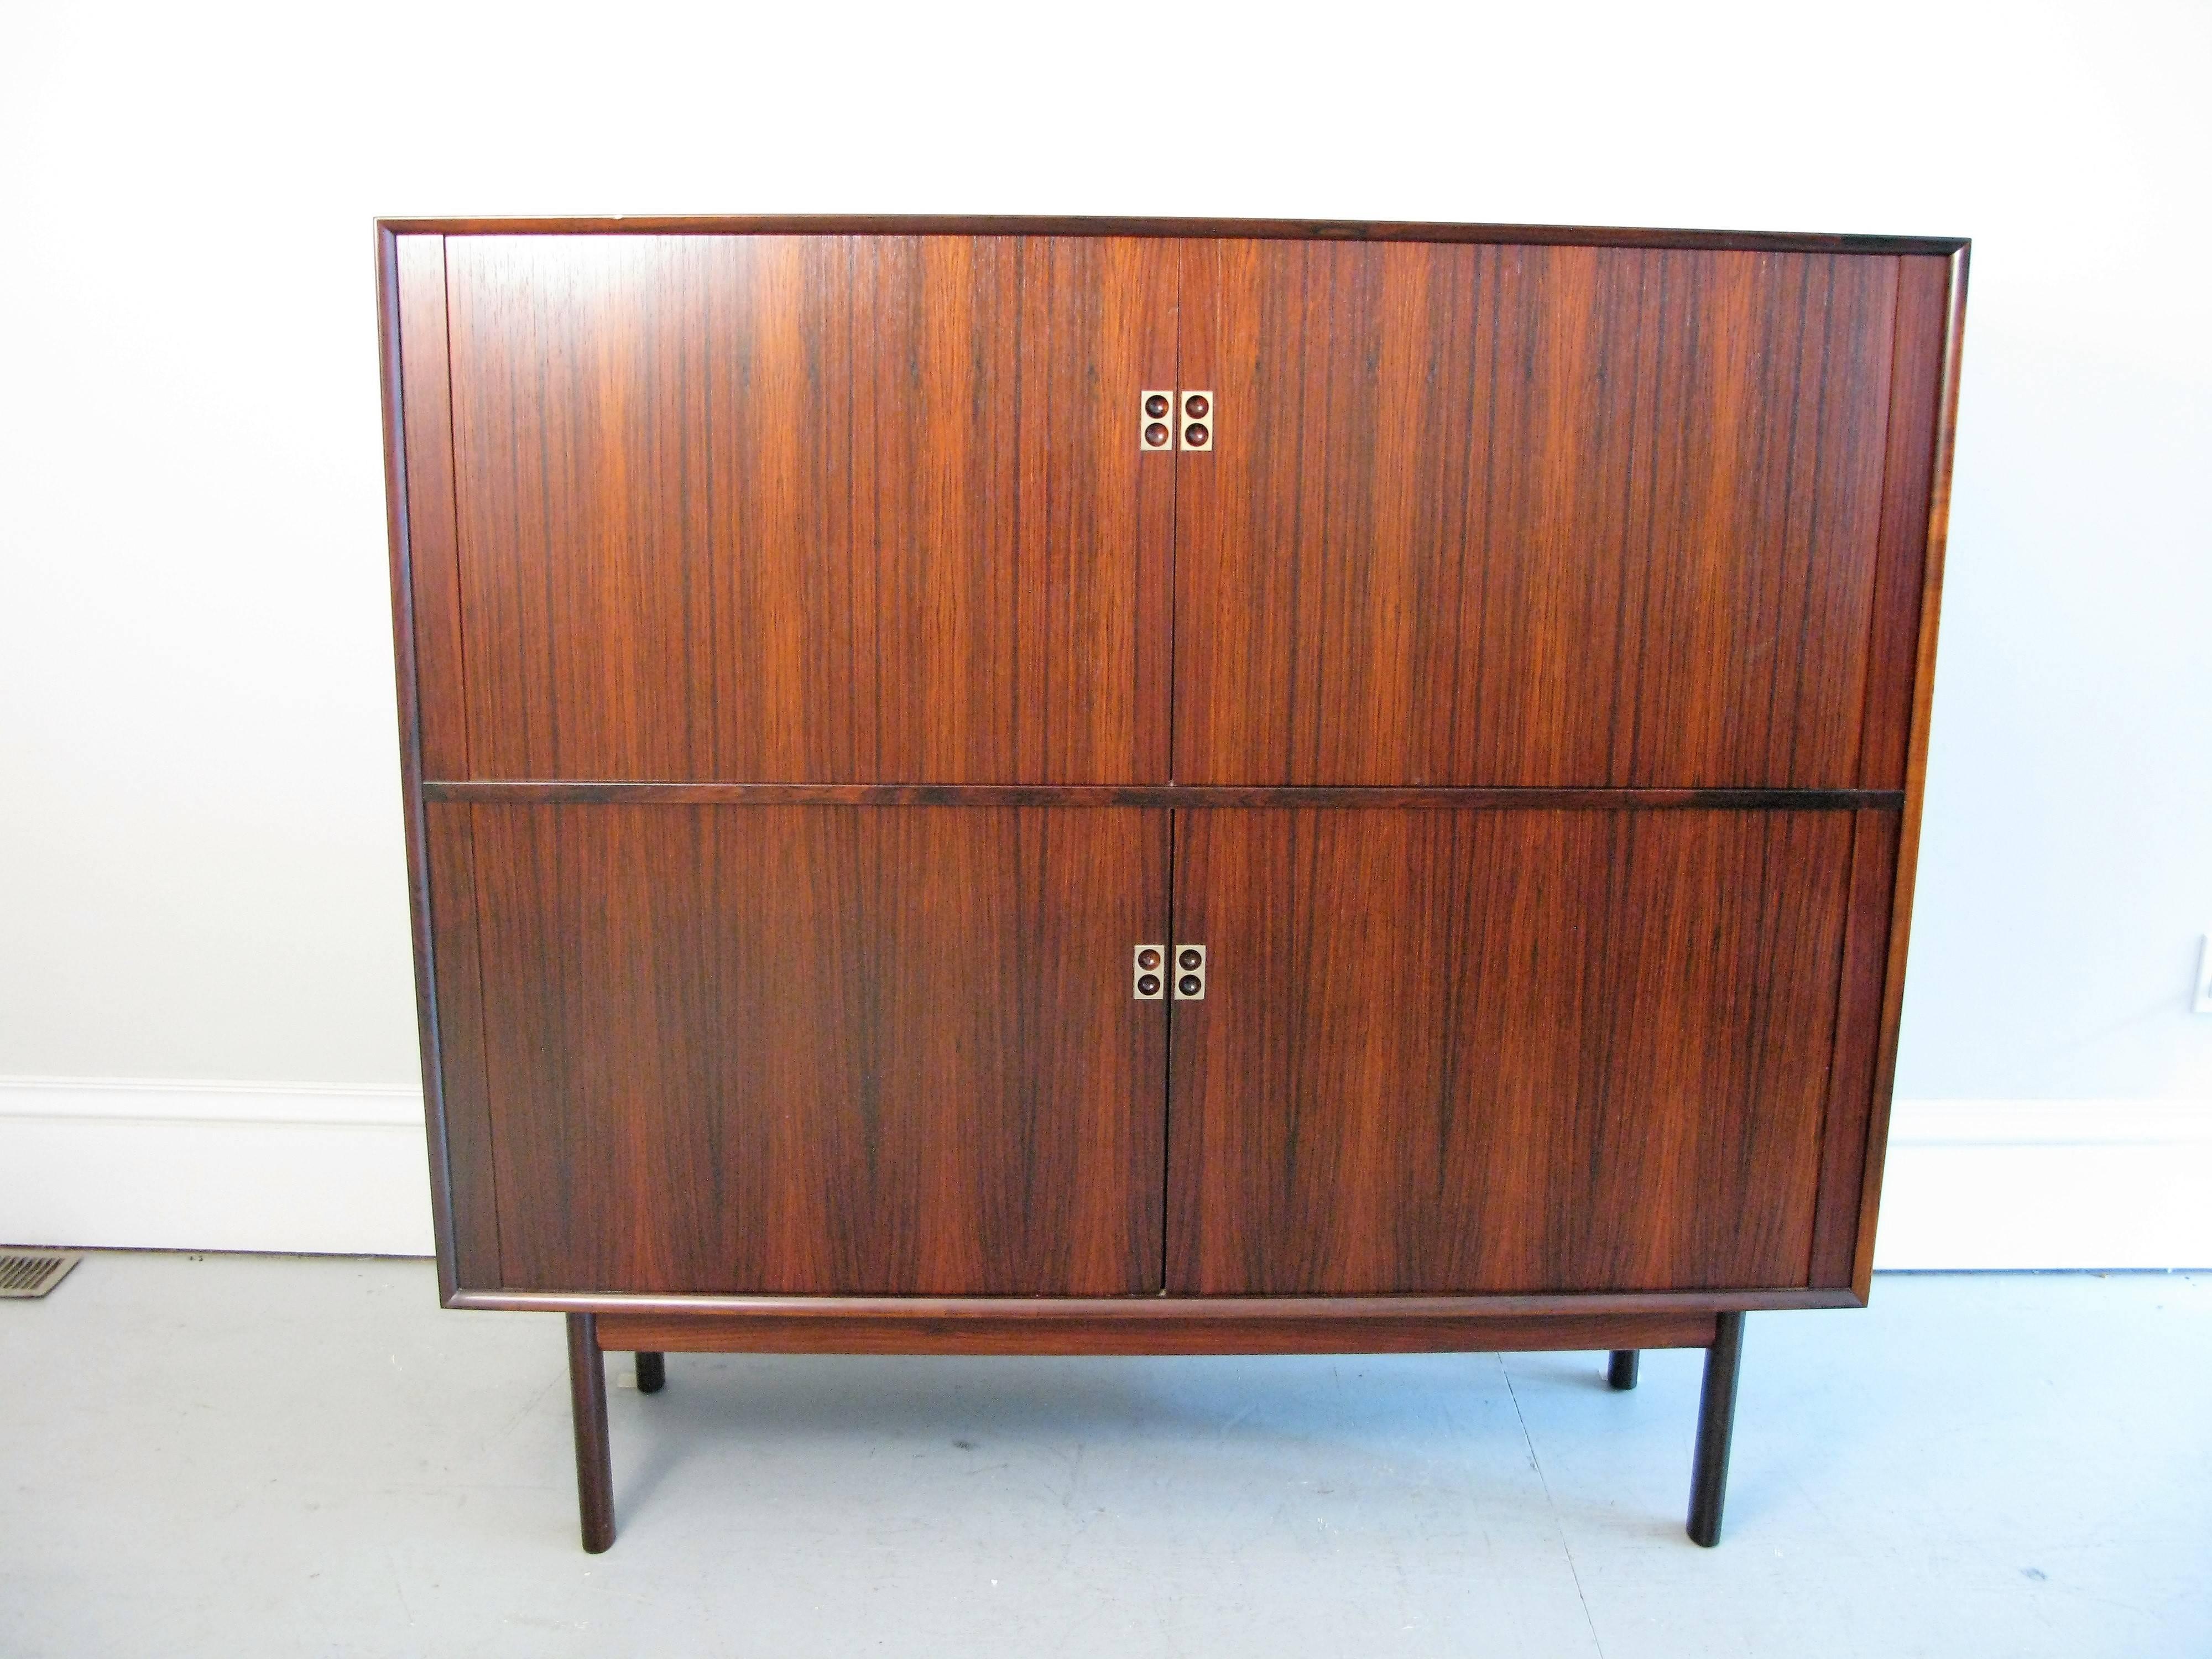 Beautiful Danish rosewood cabinet with tambout doors designed by Arne Vodder for Sibast. Label inside cabinet.